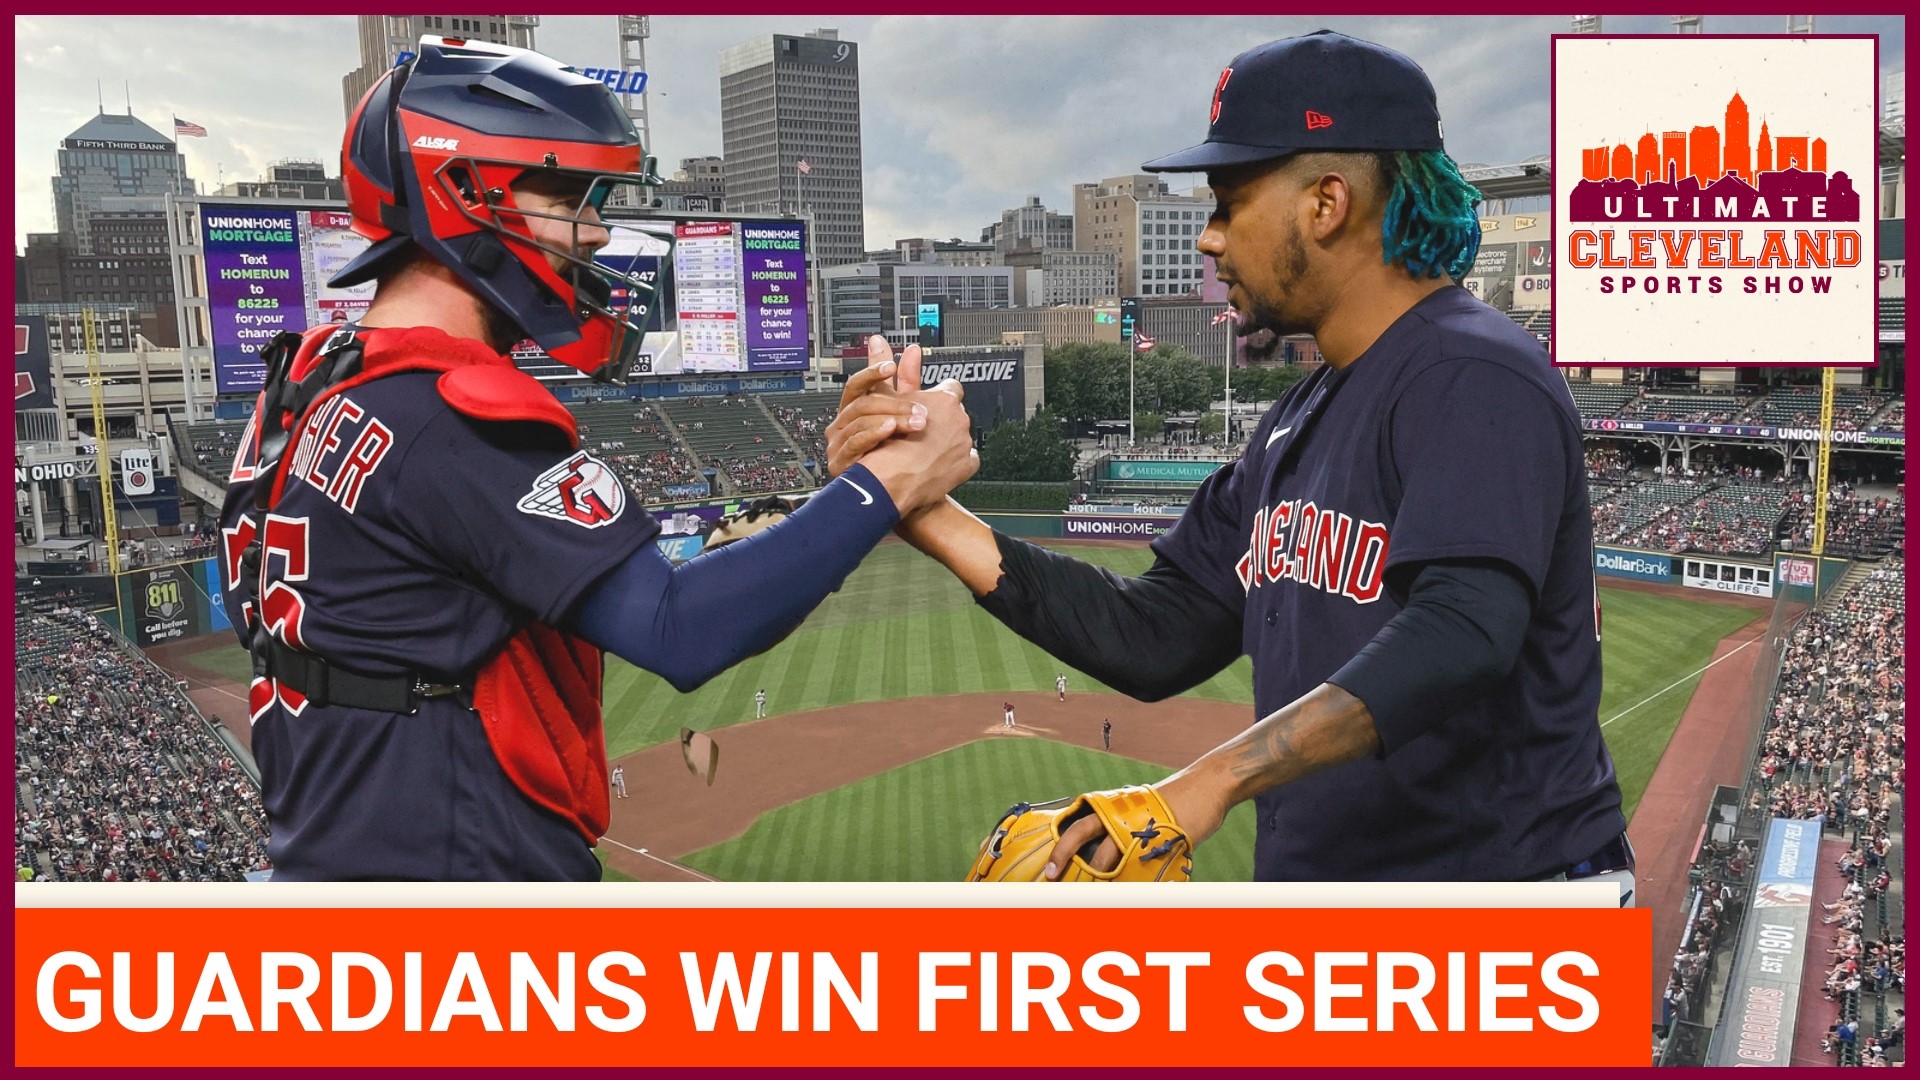 The Cleveland Guardians bounce back after a rough opening game to win their first series against Seattle.